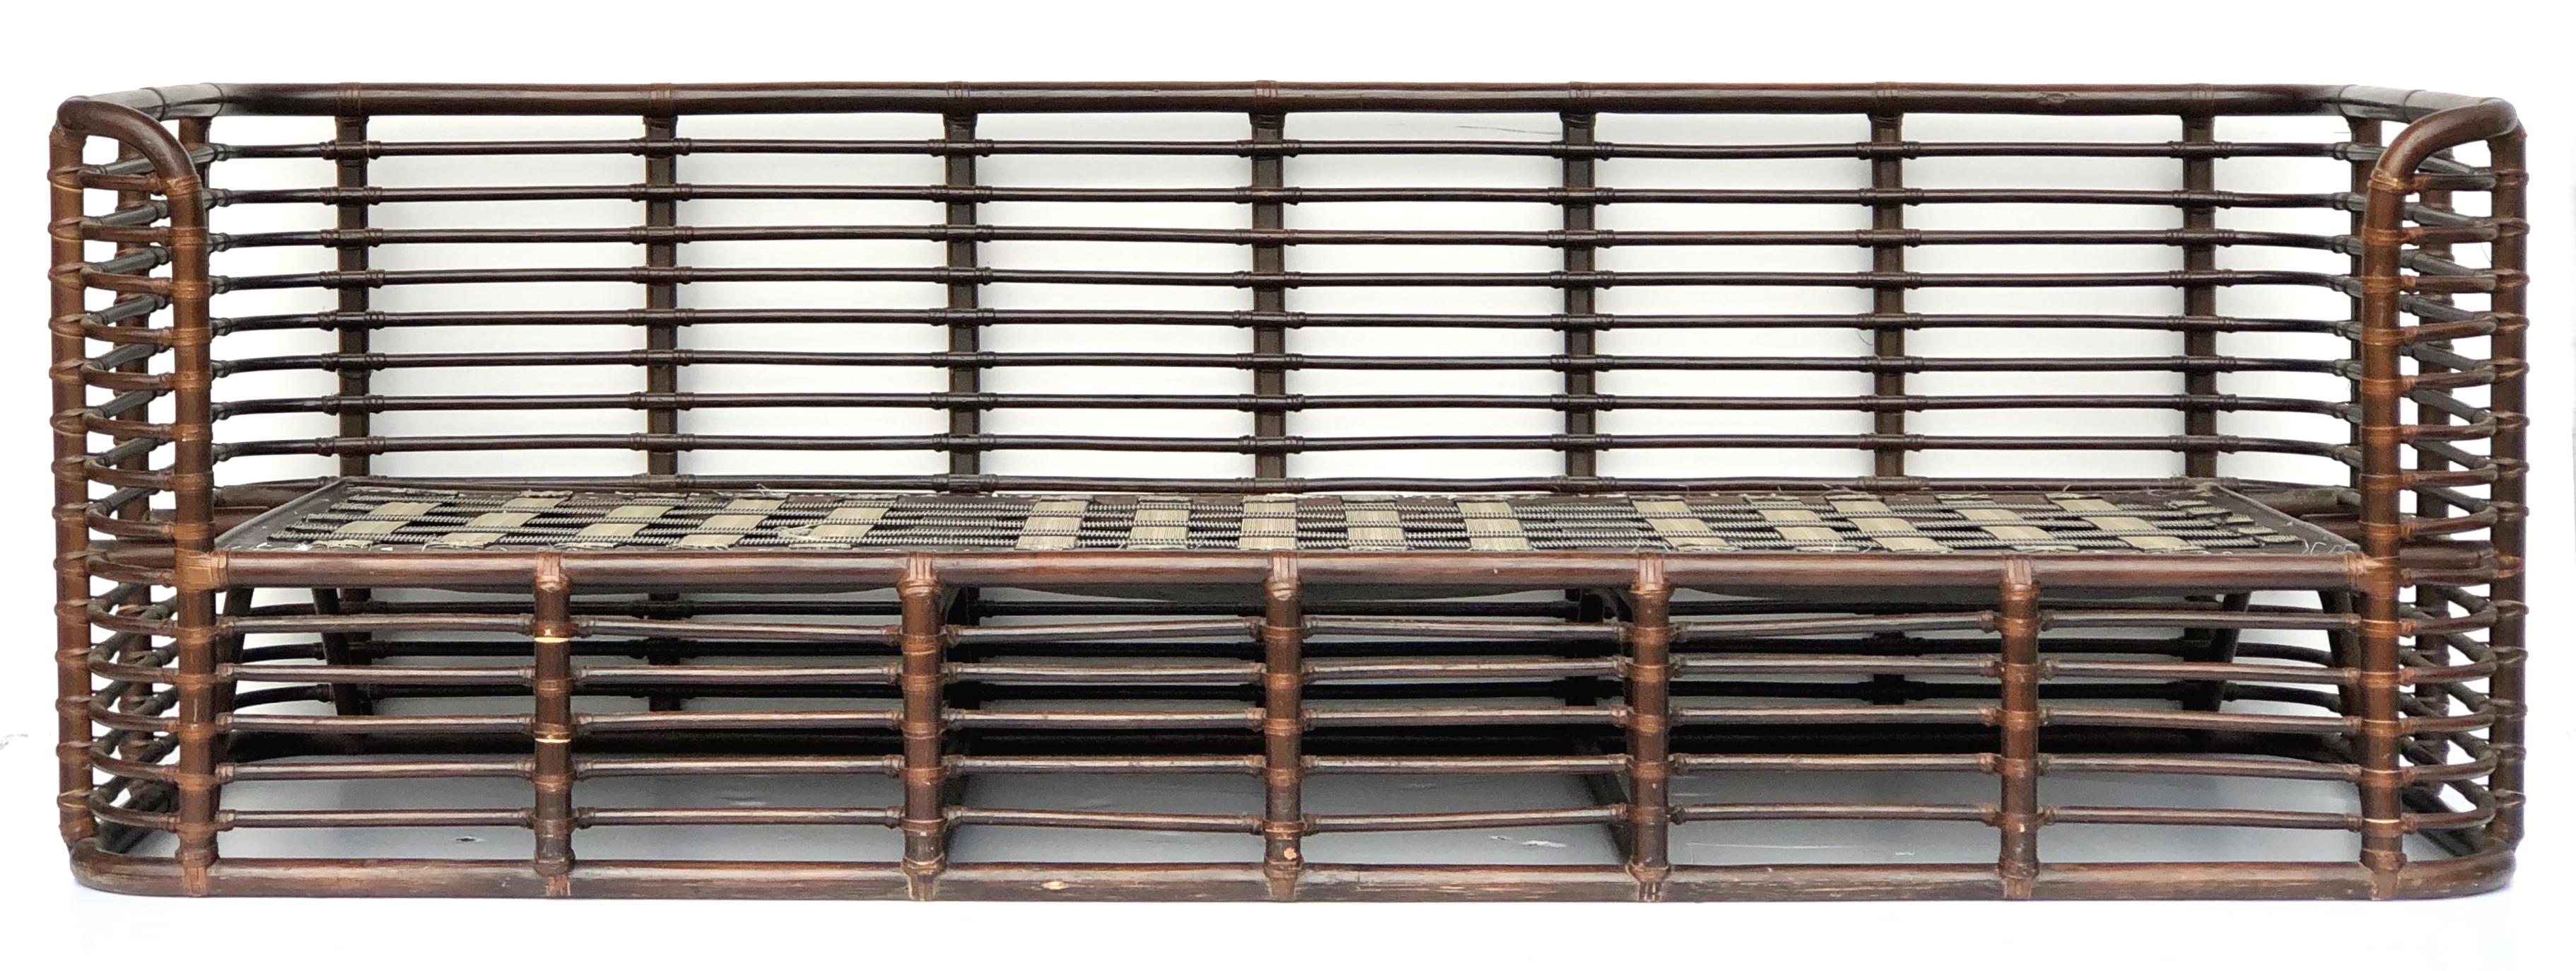 Henry Olko 1970s rattan sofa with velvet upholstery

Offered for sale is a vintage circa 1970s sculptural Henry Olko rattan and leather-wrapped sofa with loose cushions upholstered in velvet fabric. The sofa has been recovered in a stripe pattern